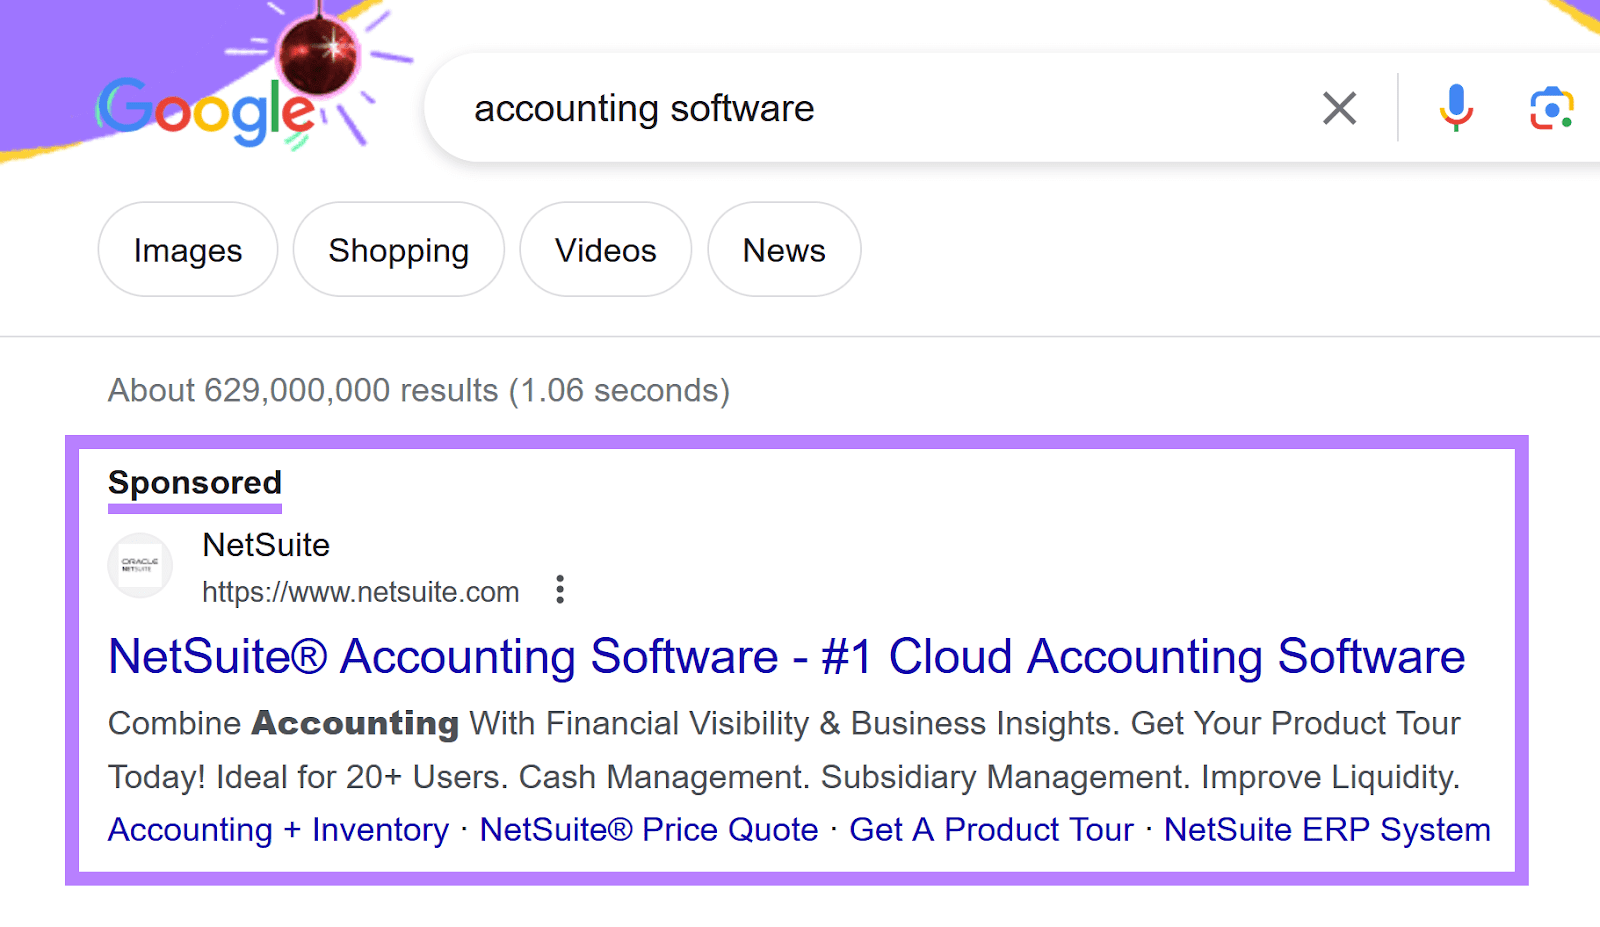 a paid search ad for NetSuite’s accounting software